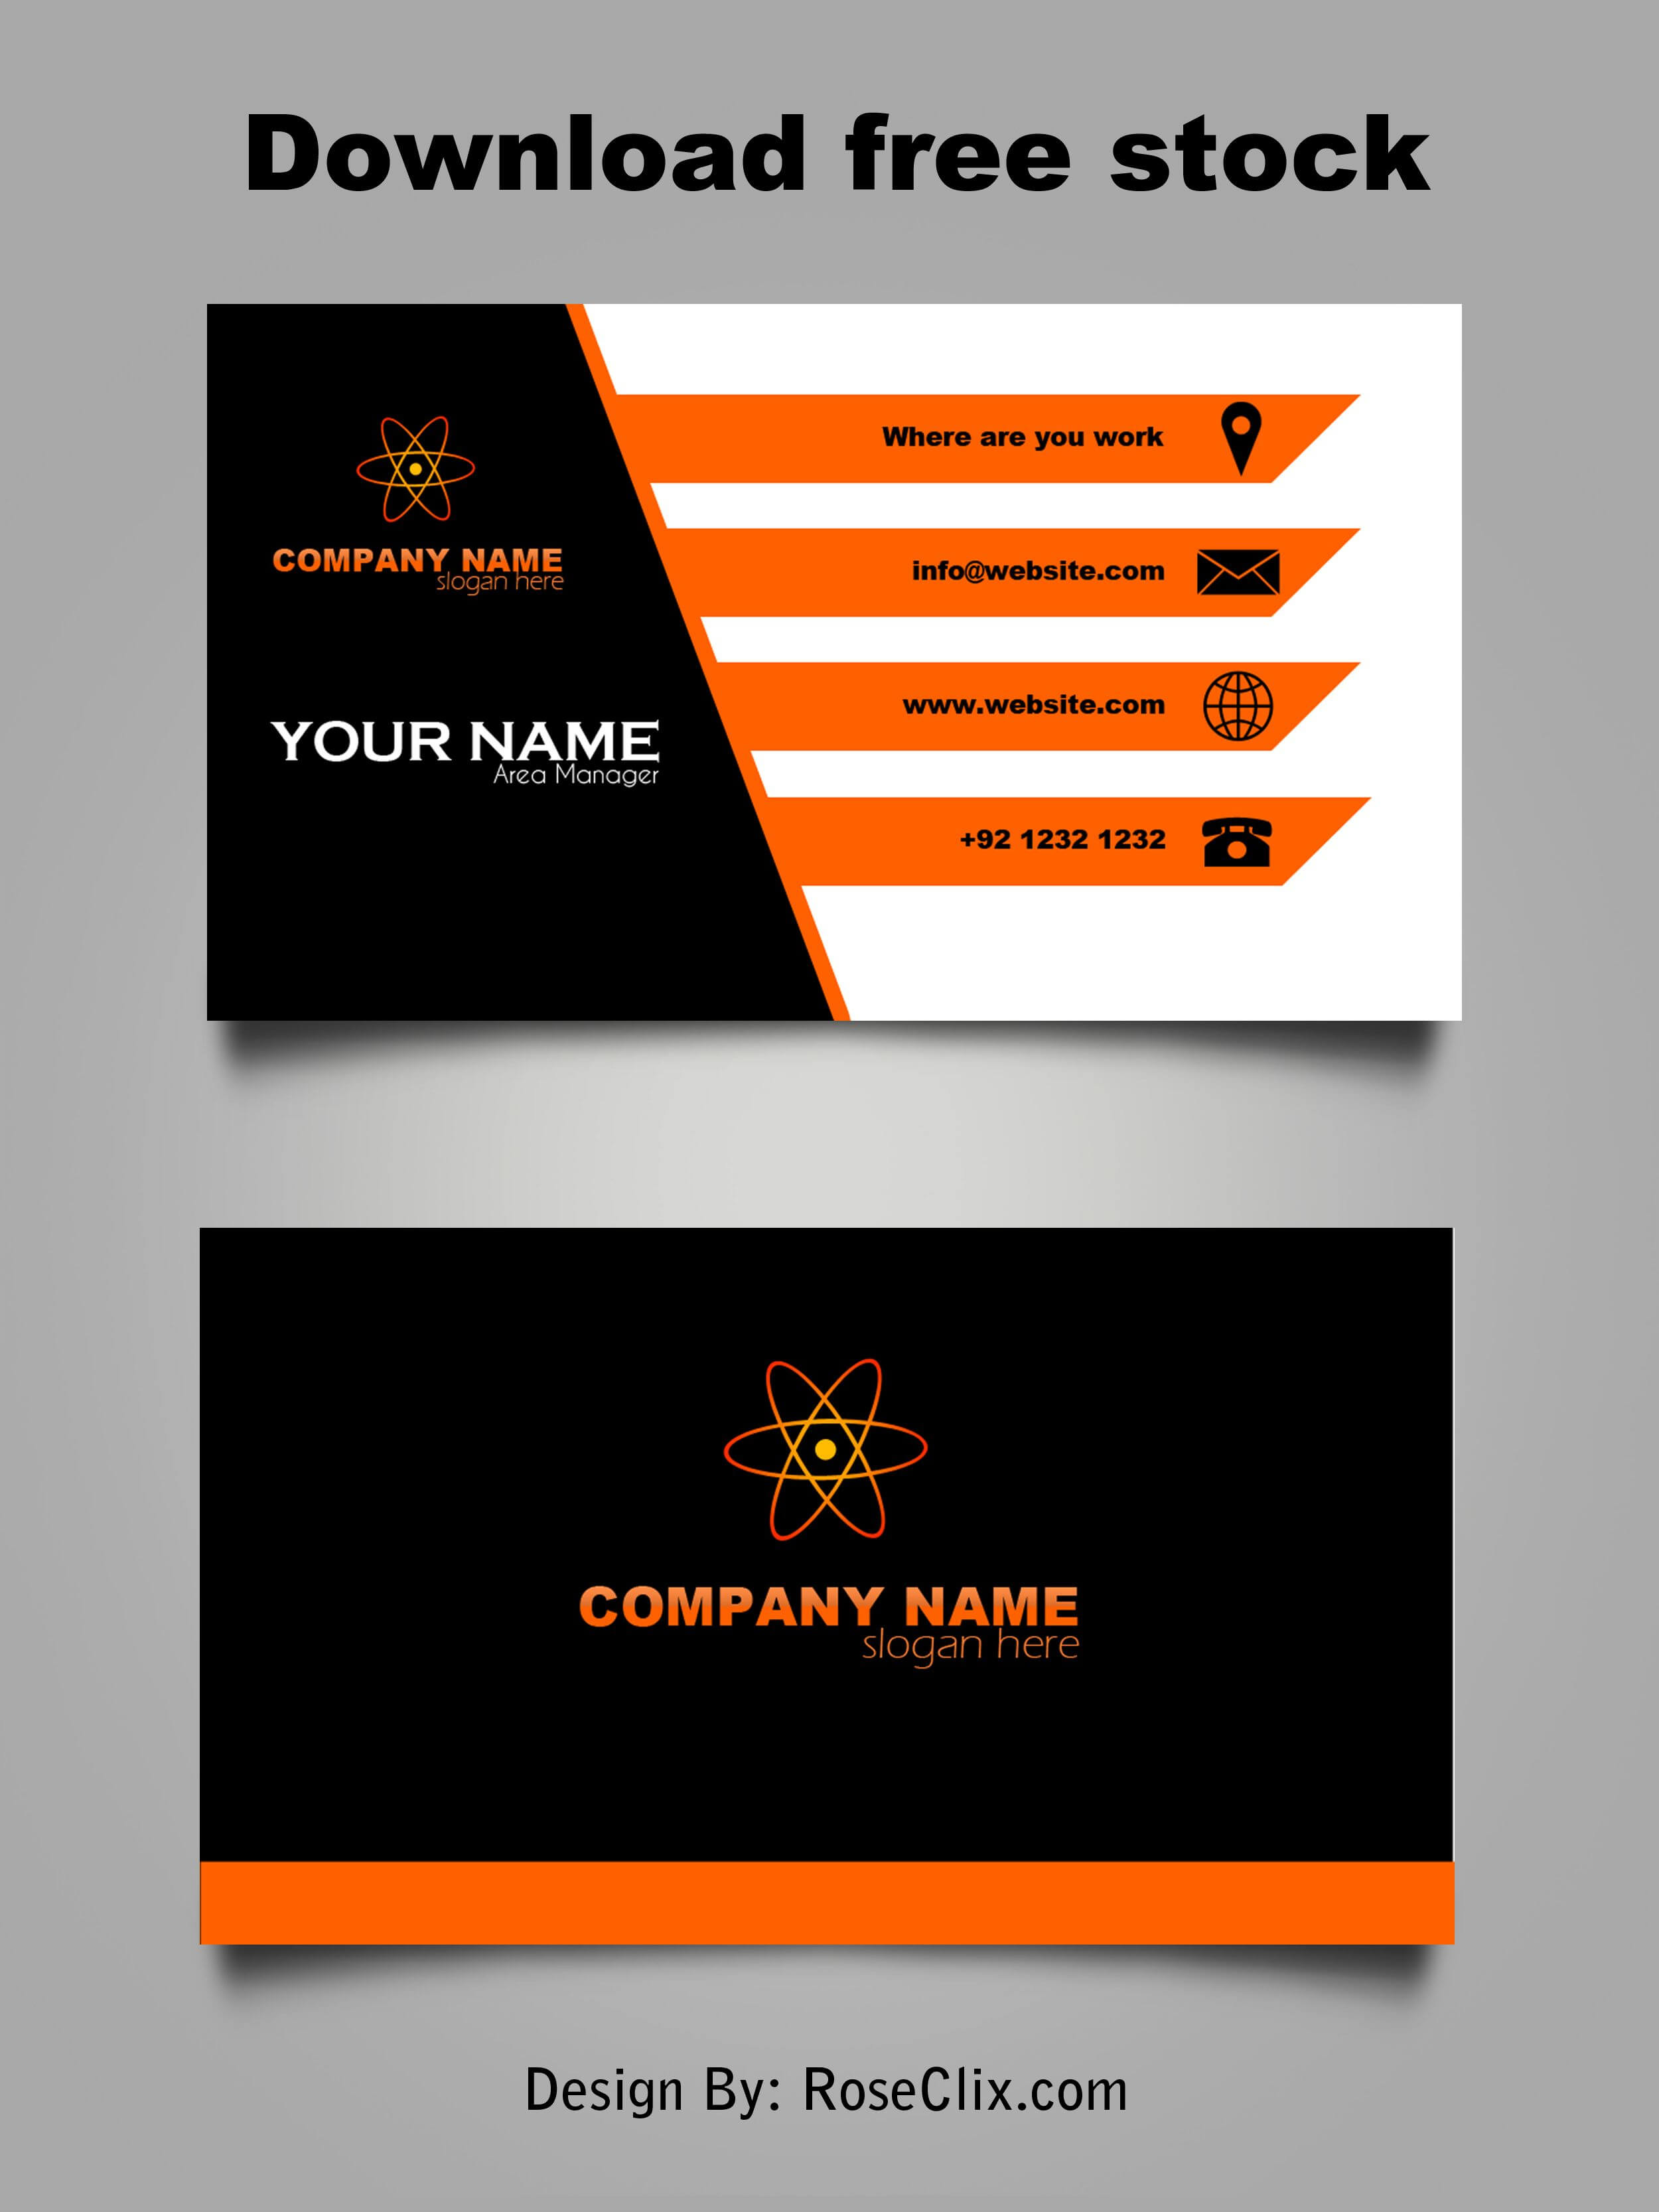 Business Card Template Free Downloads Psd Fils. In 2019 Intended For Templates For Visiting Cards Free Downloads